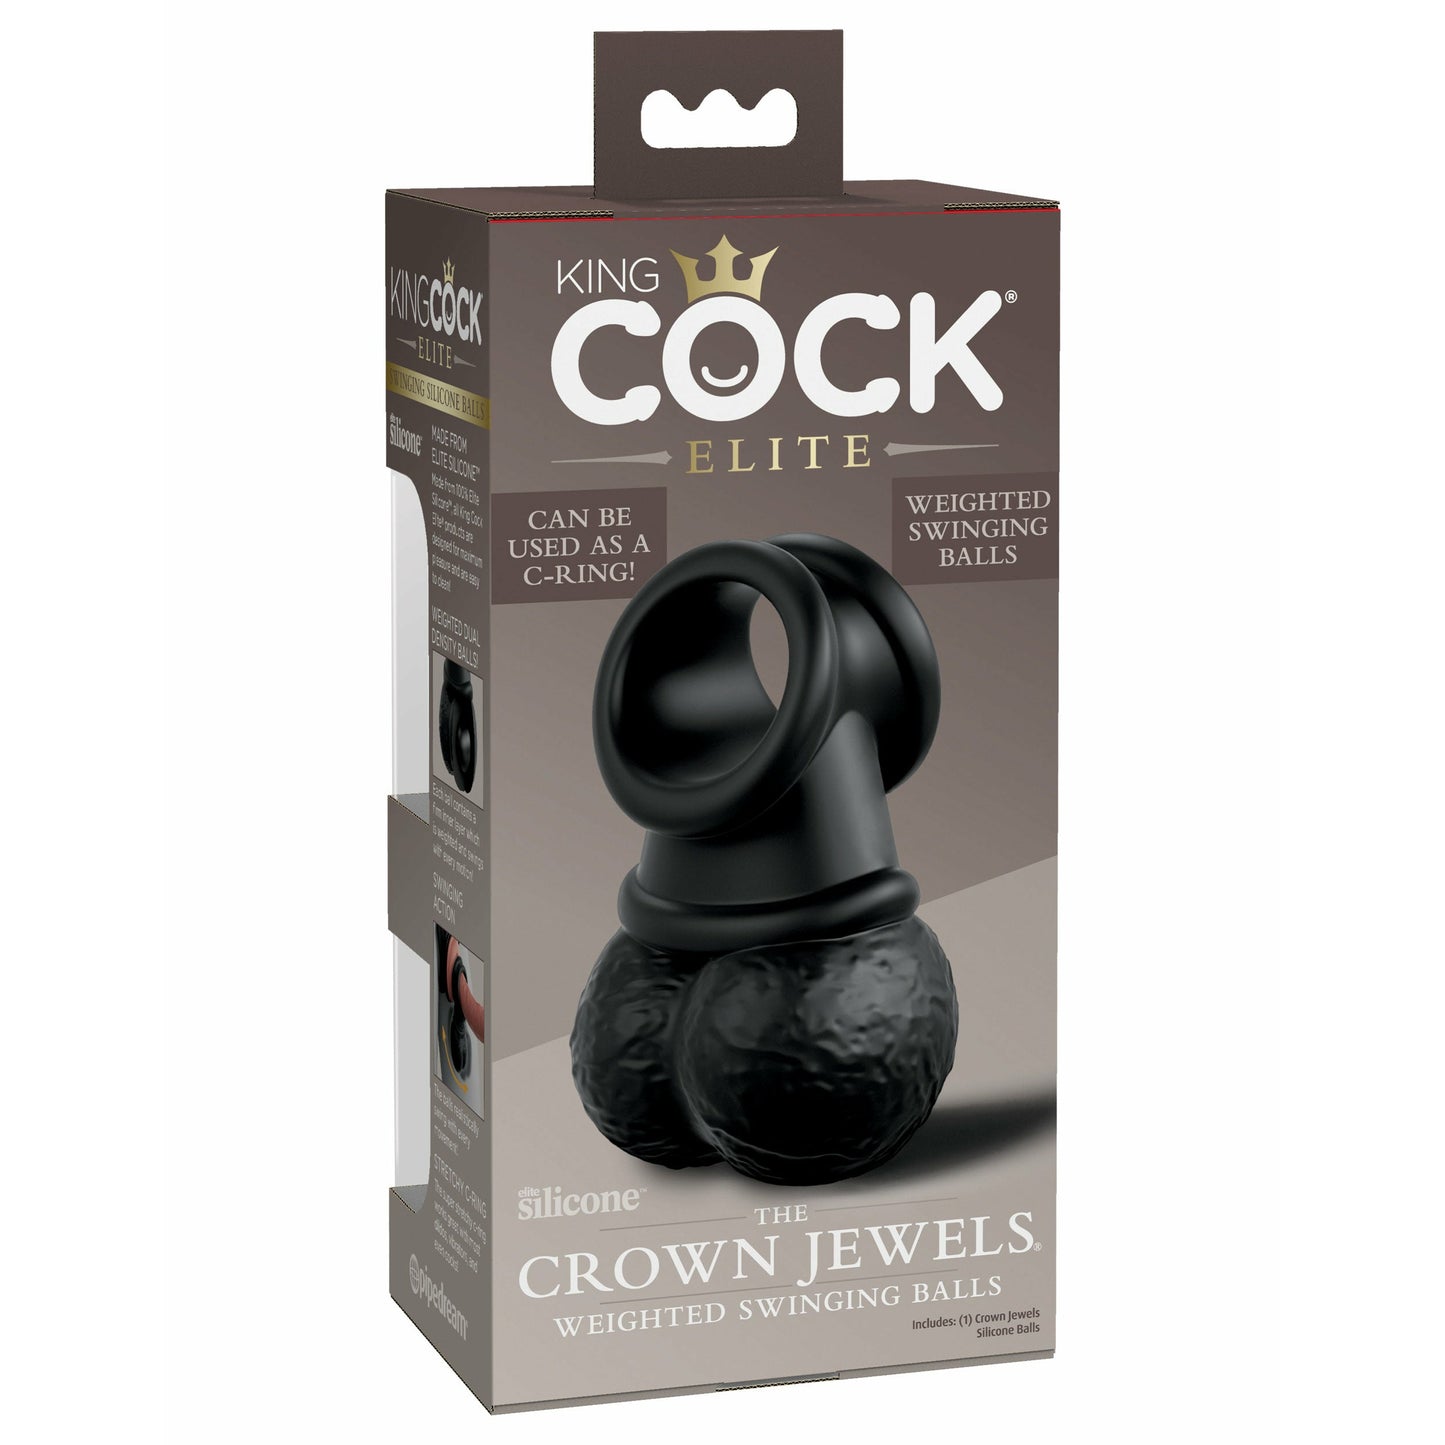 King Cock Elite - the Crown Jewels - Silicone Weighted Swinging Balls